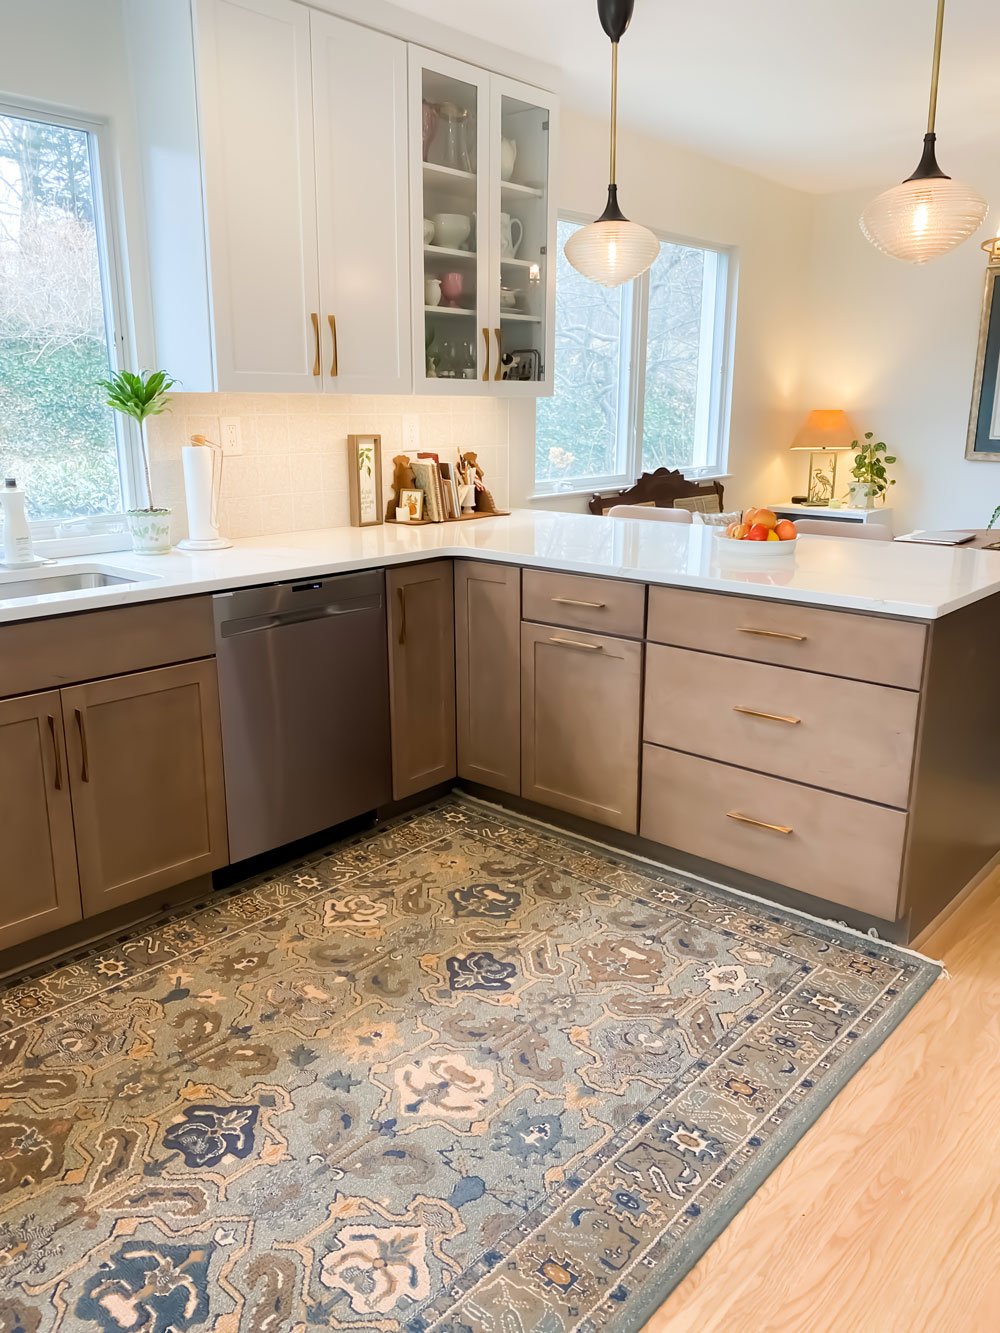 Pure kitchen remodel with contemporary colors, pale birch wood floors, and a pastel area rug